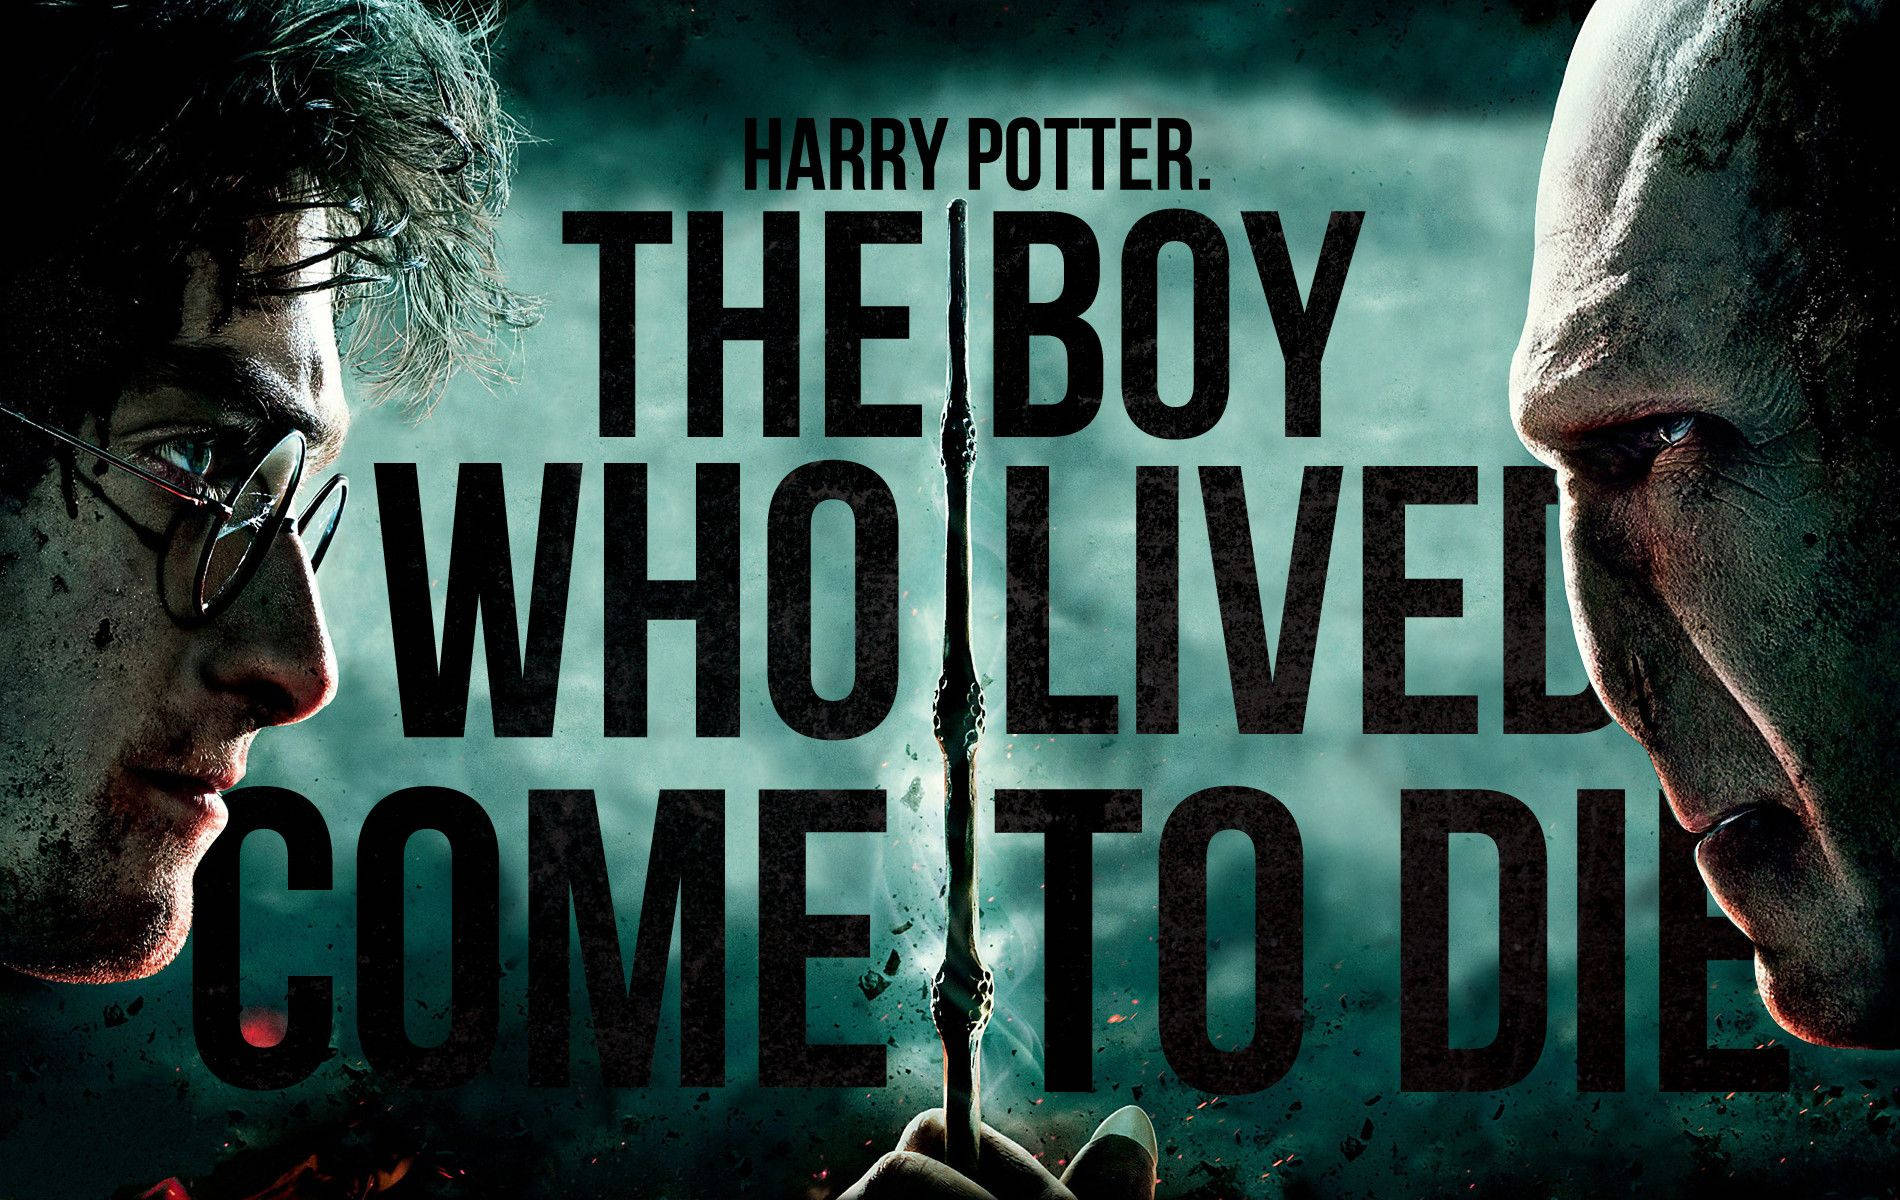 Lord Voldemort Harry Potter Laptop Background